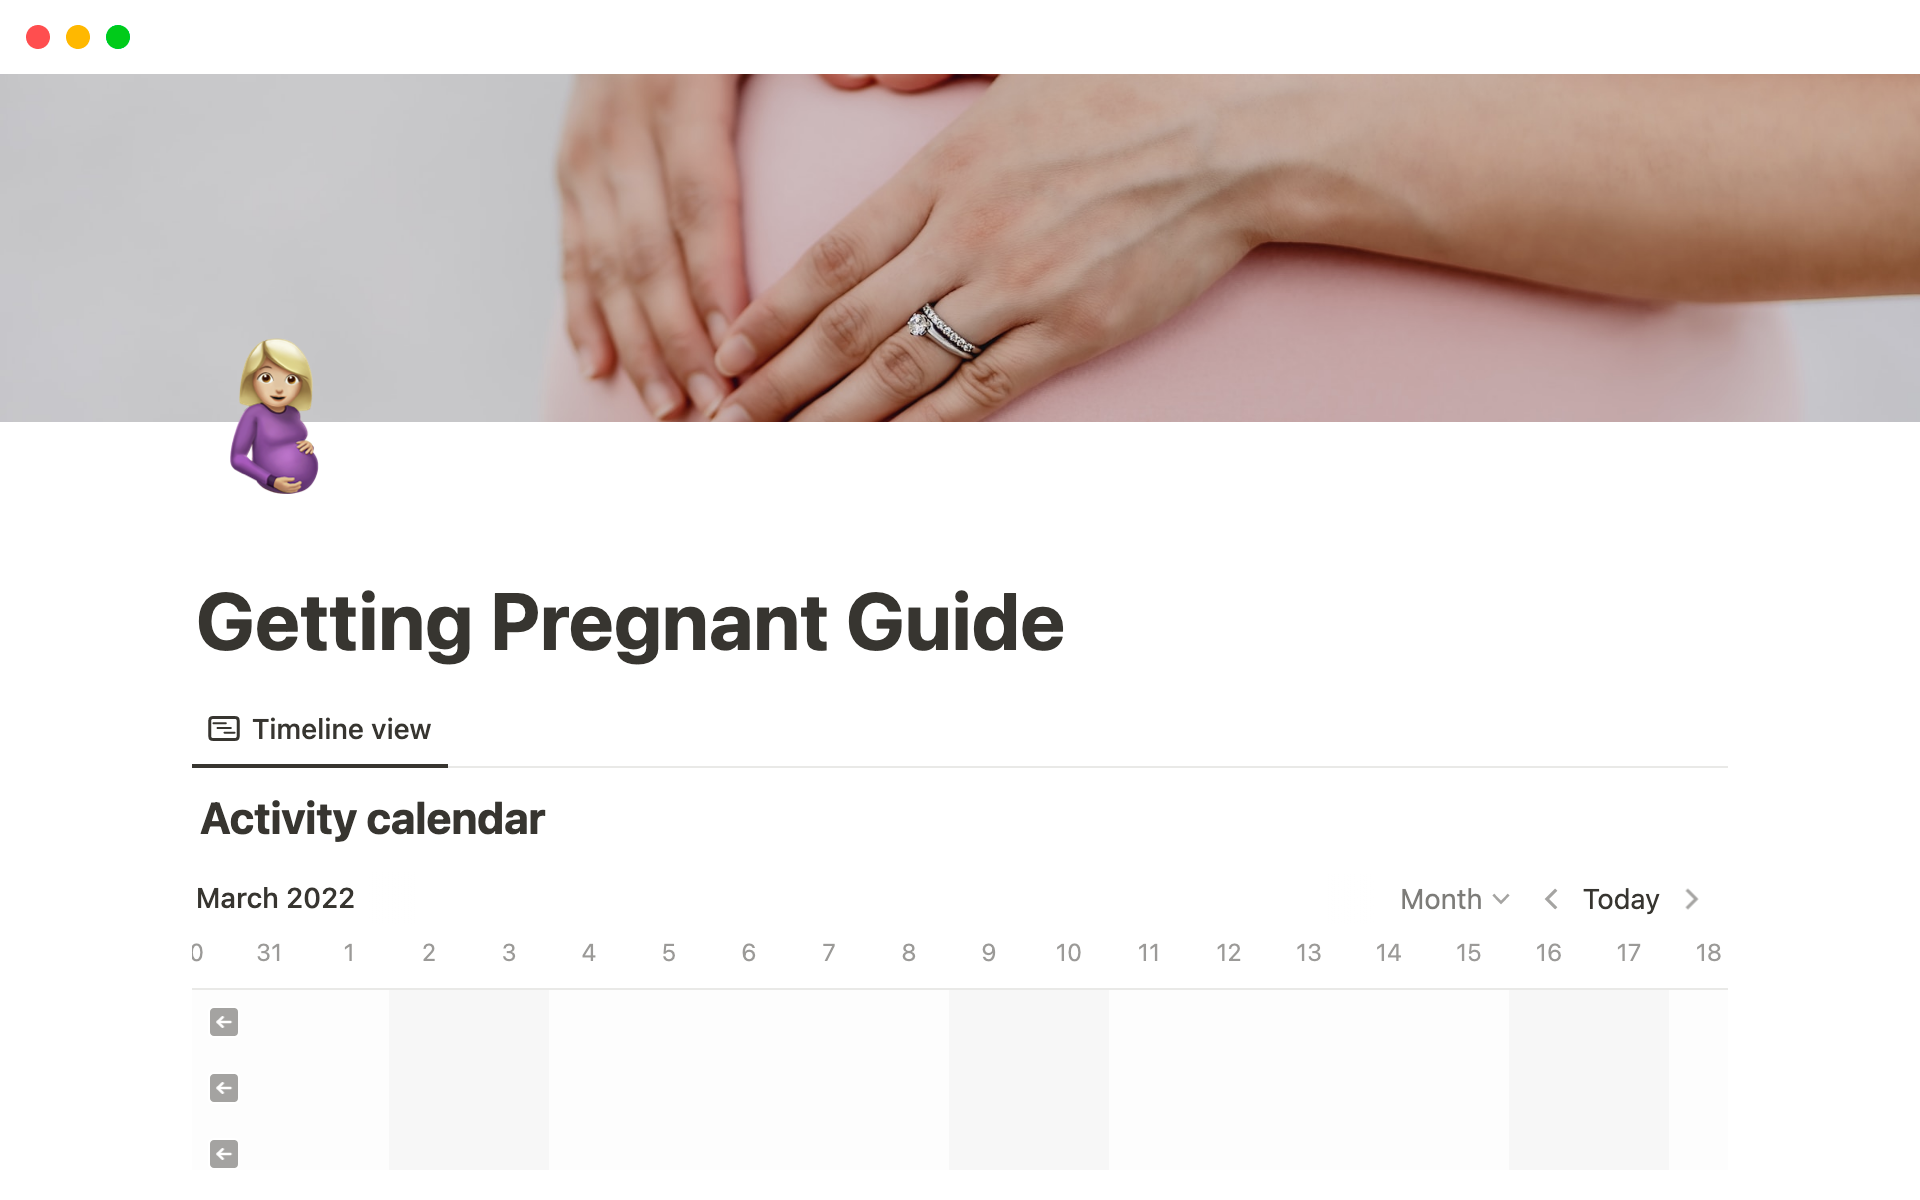 Stay organized and well informed for a healthy pregnancy.